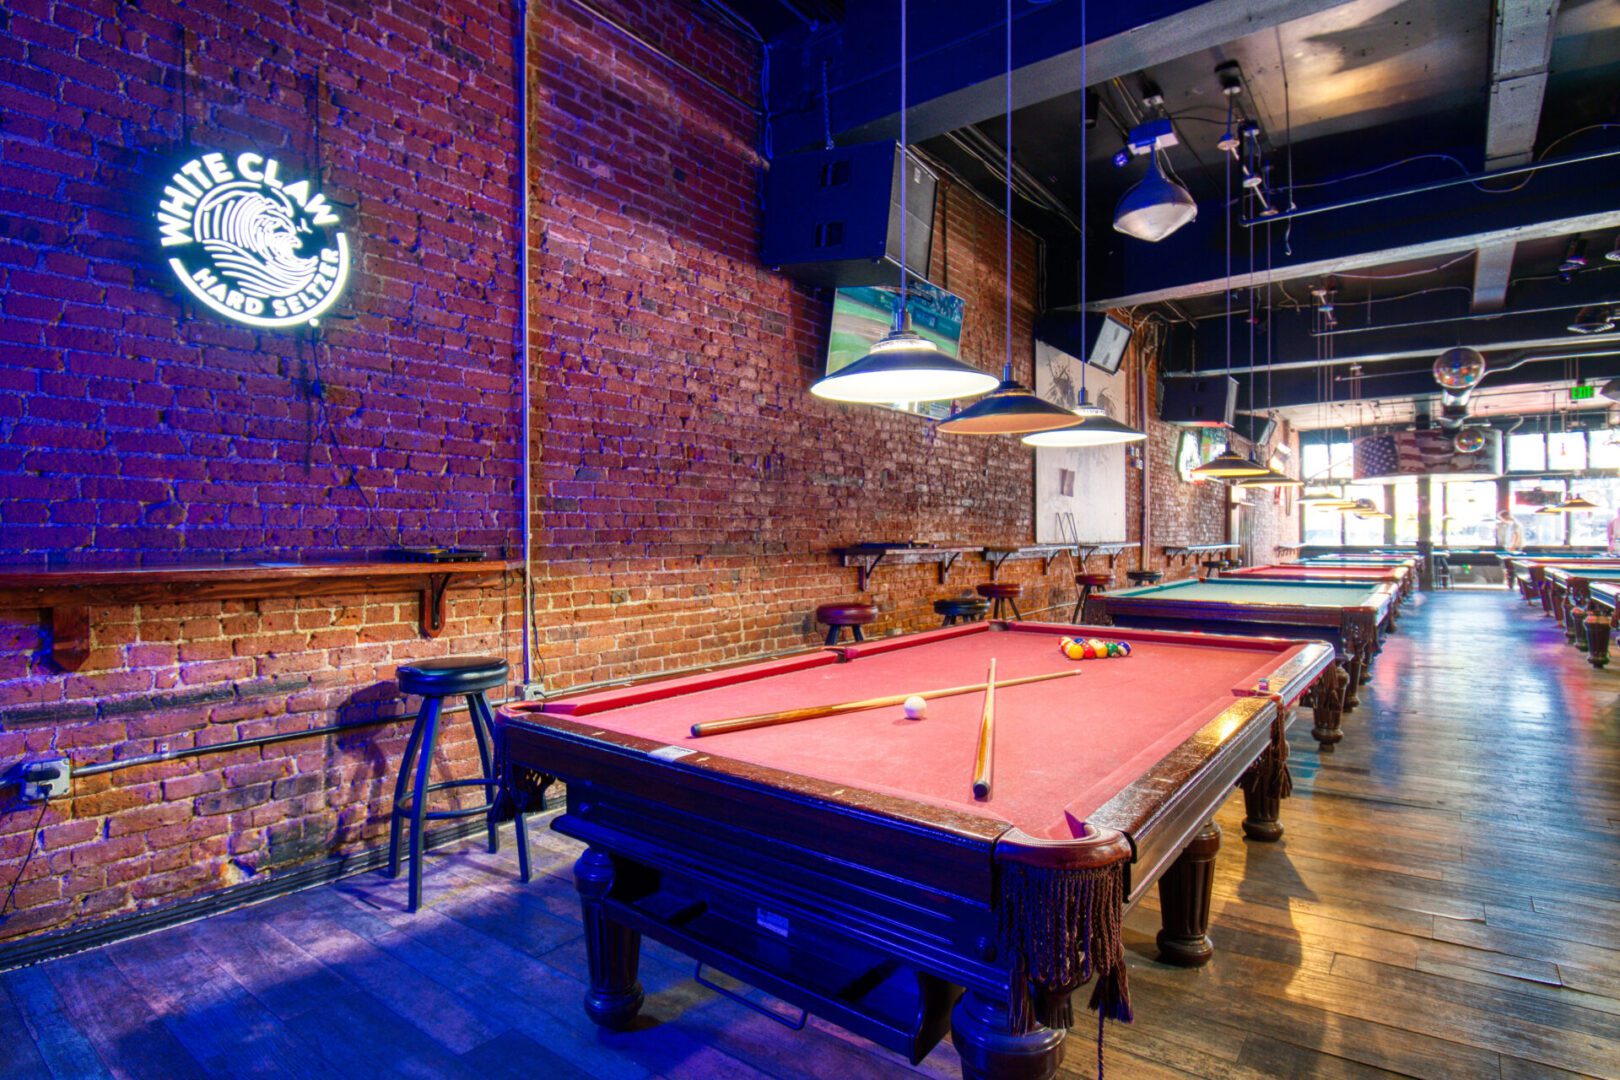 A pool table in a room with brick walls.